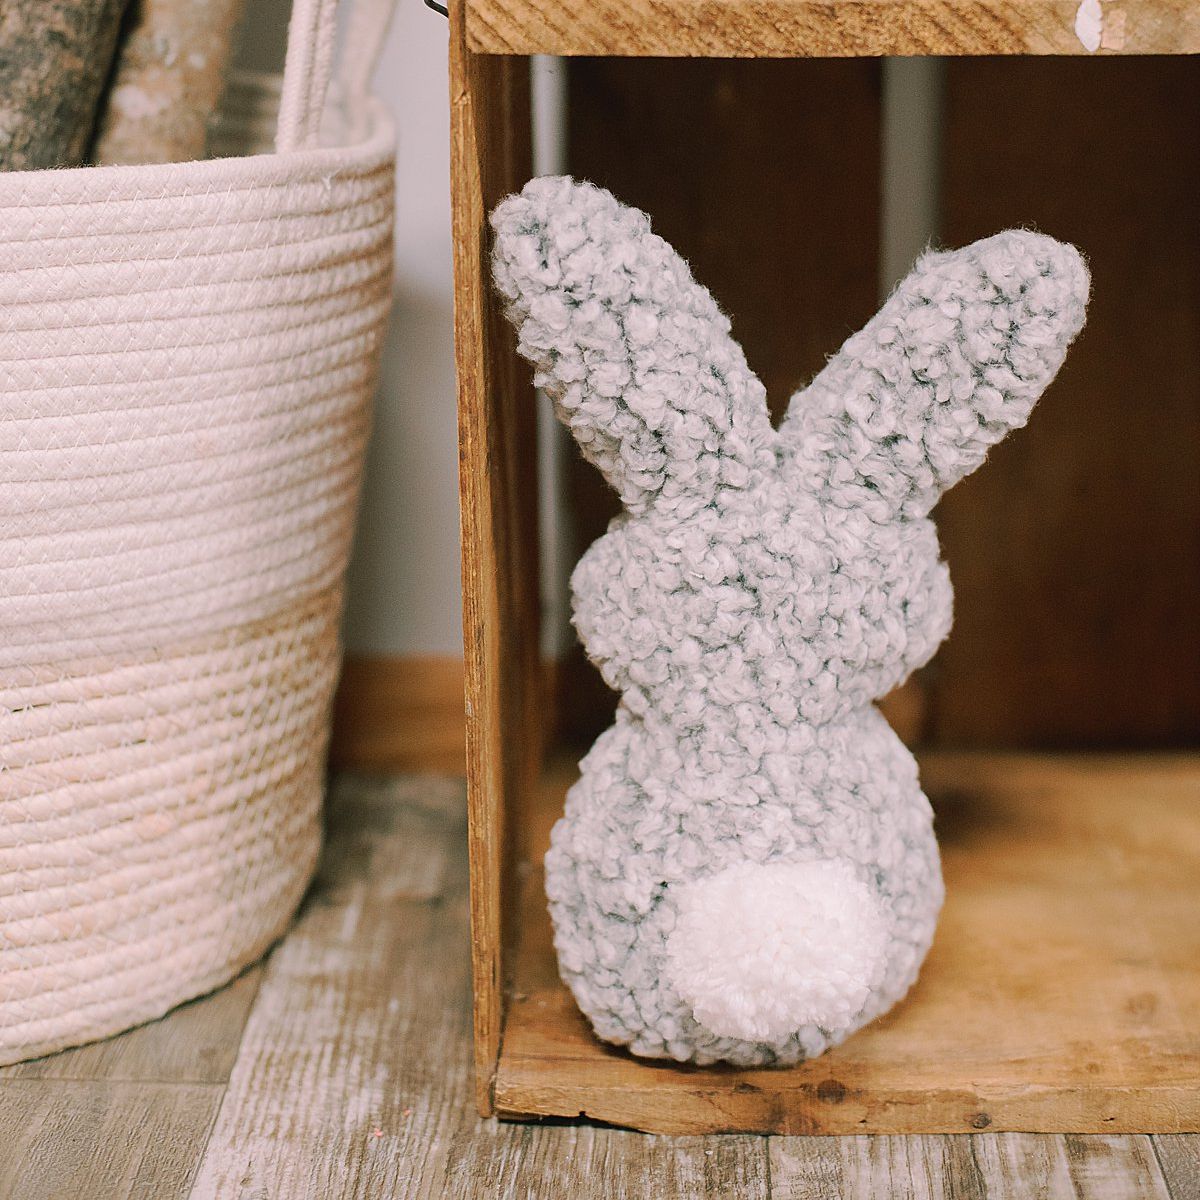 Stuffed bunny rabbit made out of an old fuzzy sweatshirt, with a white yarn pompom for a tail.